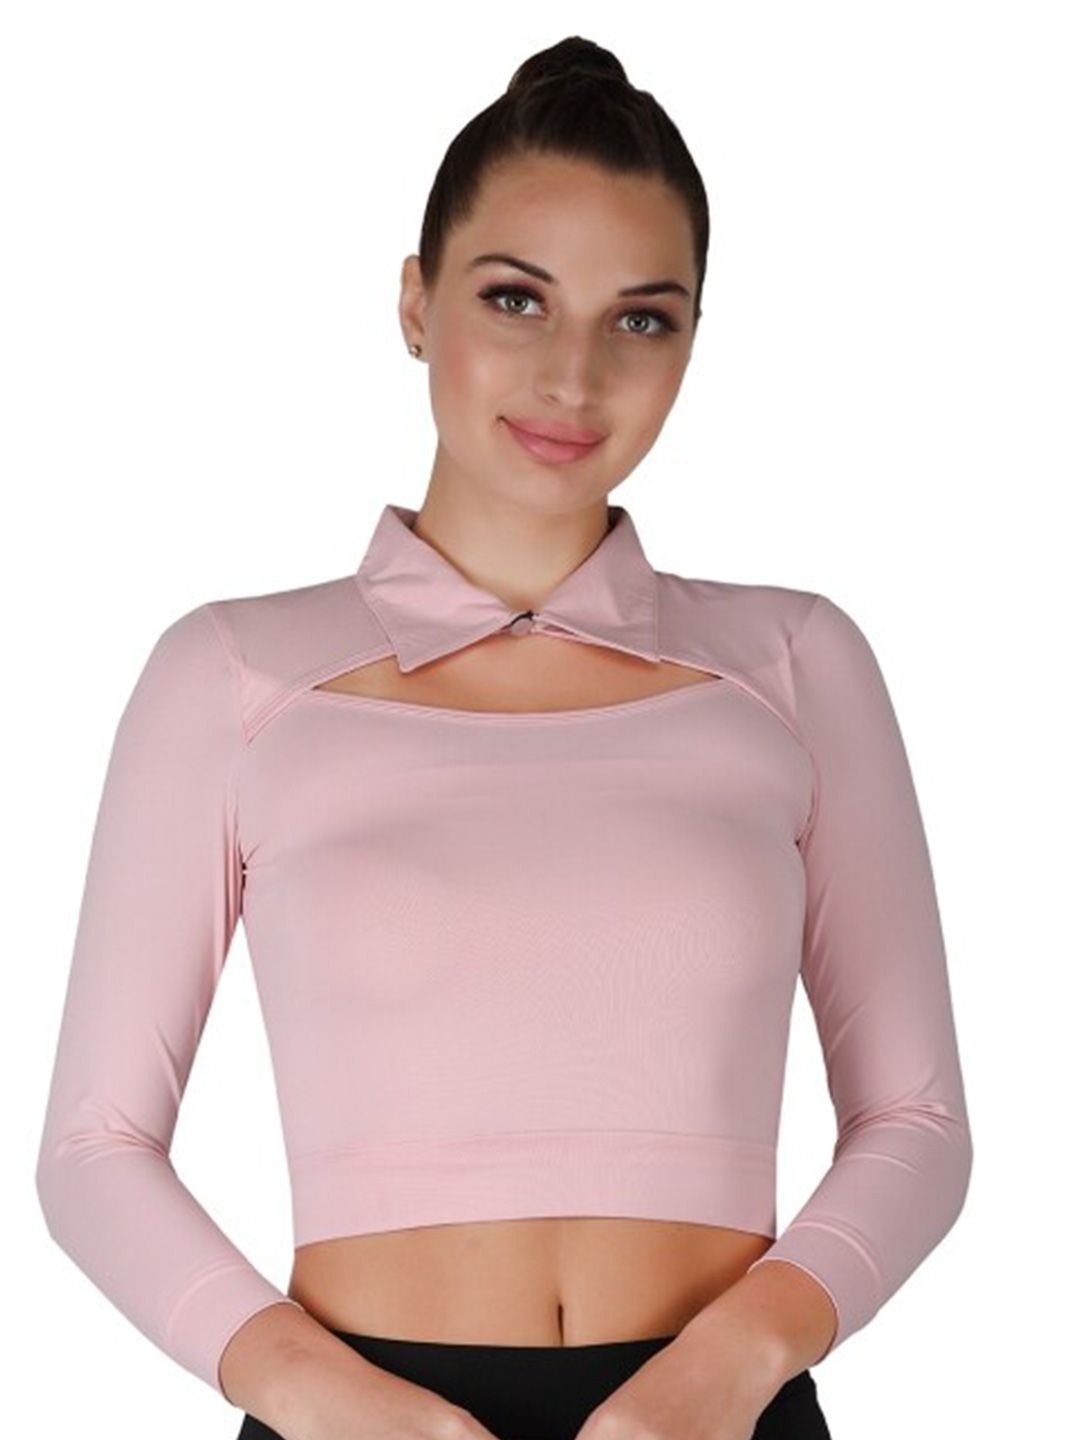 La Aimee Pink Solid Top Price in India